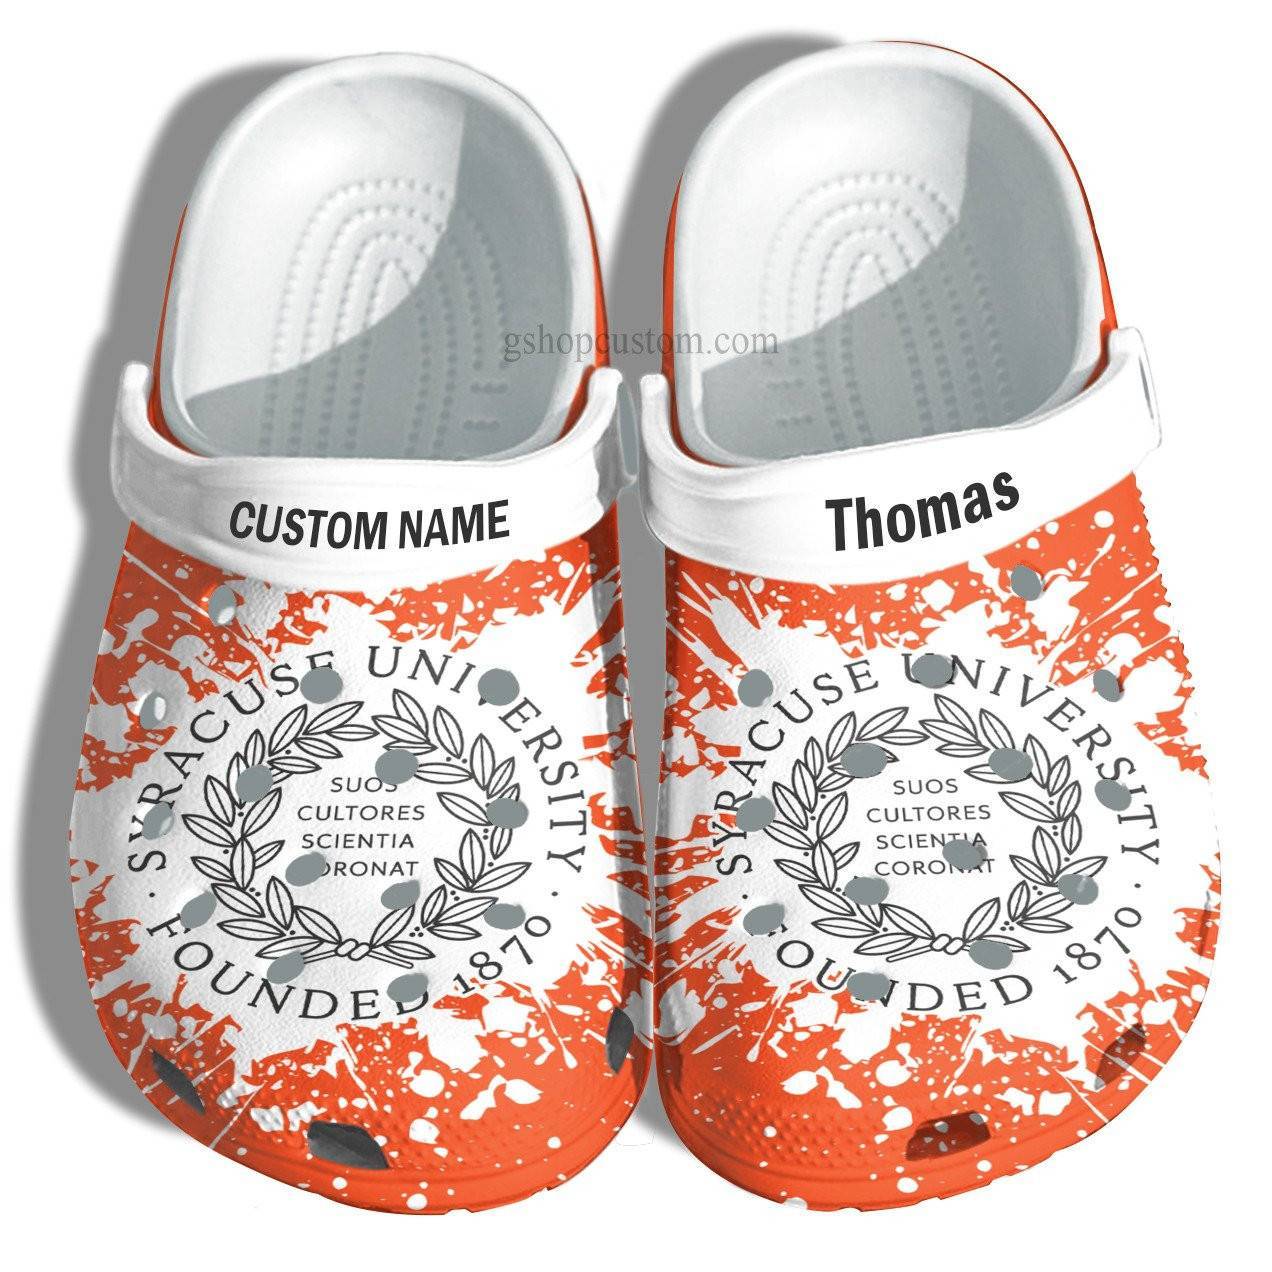 Syracuse University Graduation Gifts Croc Shoes Customize – Admission Gift Crocss Shoes